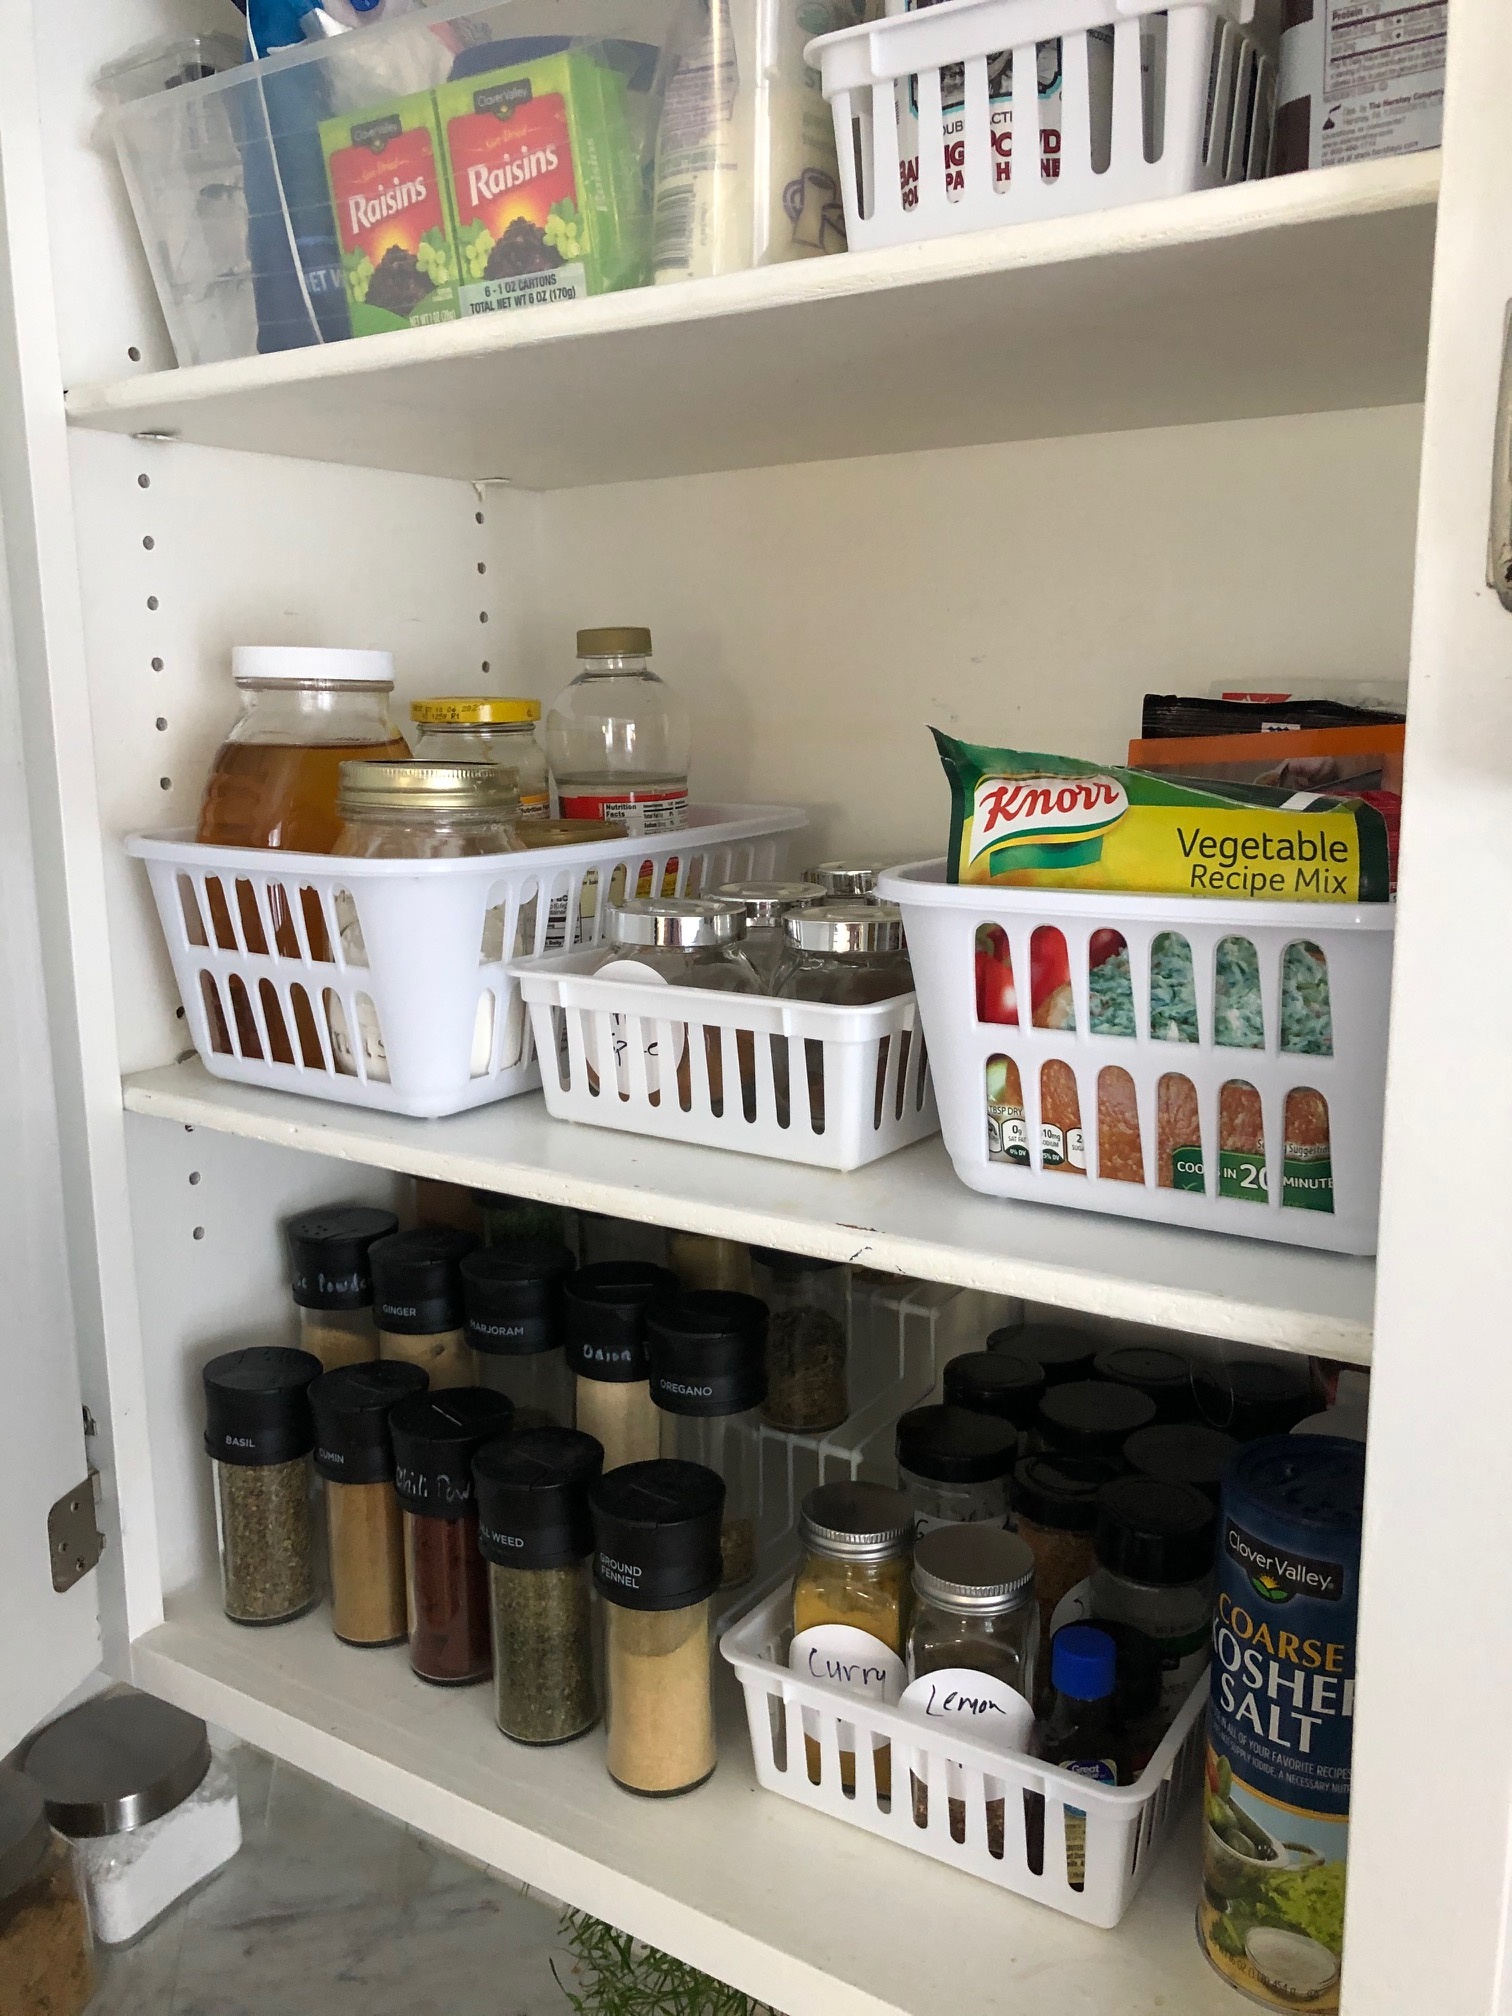 https://palletandpantry.com///wp-content/uploads/2020/01/After-Organized-Spice-and-Baking-Cabinet-rotated.jpg